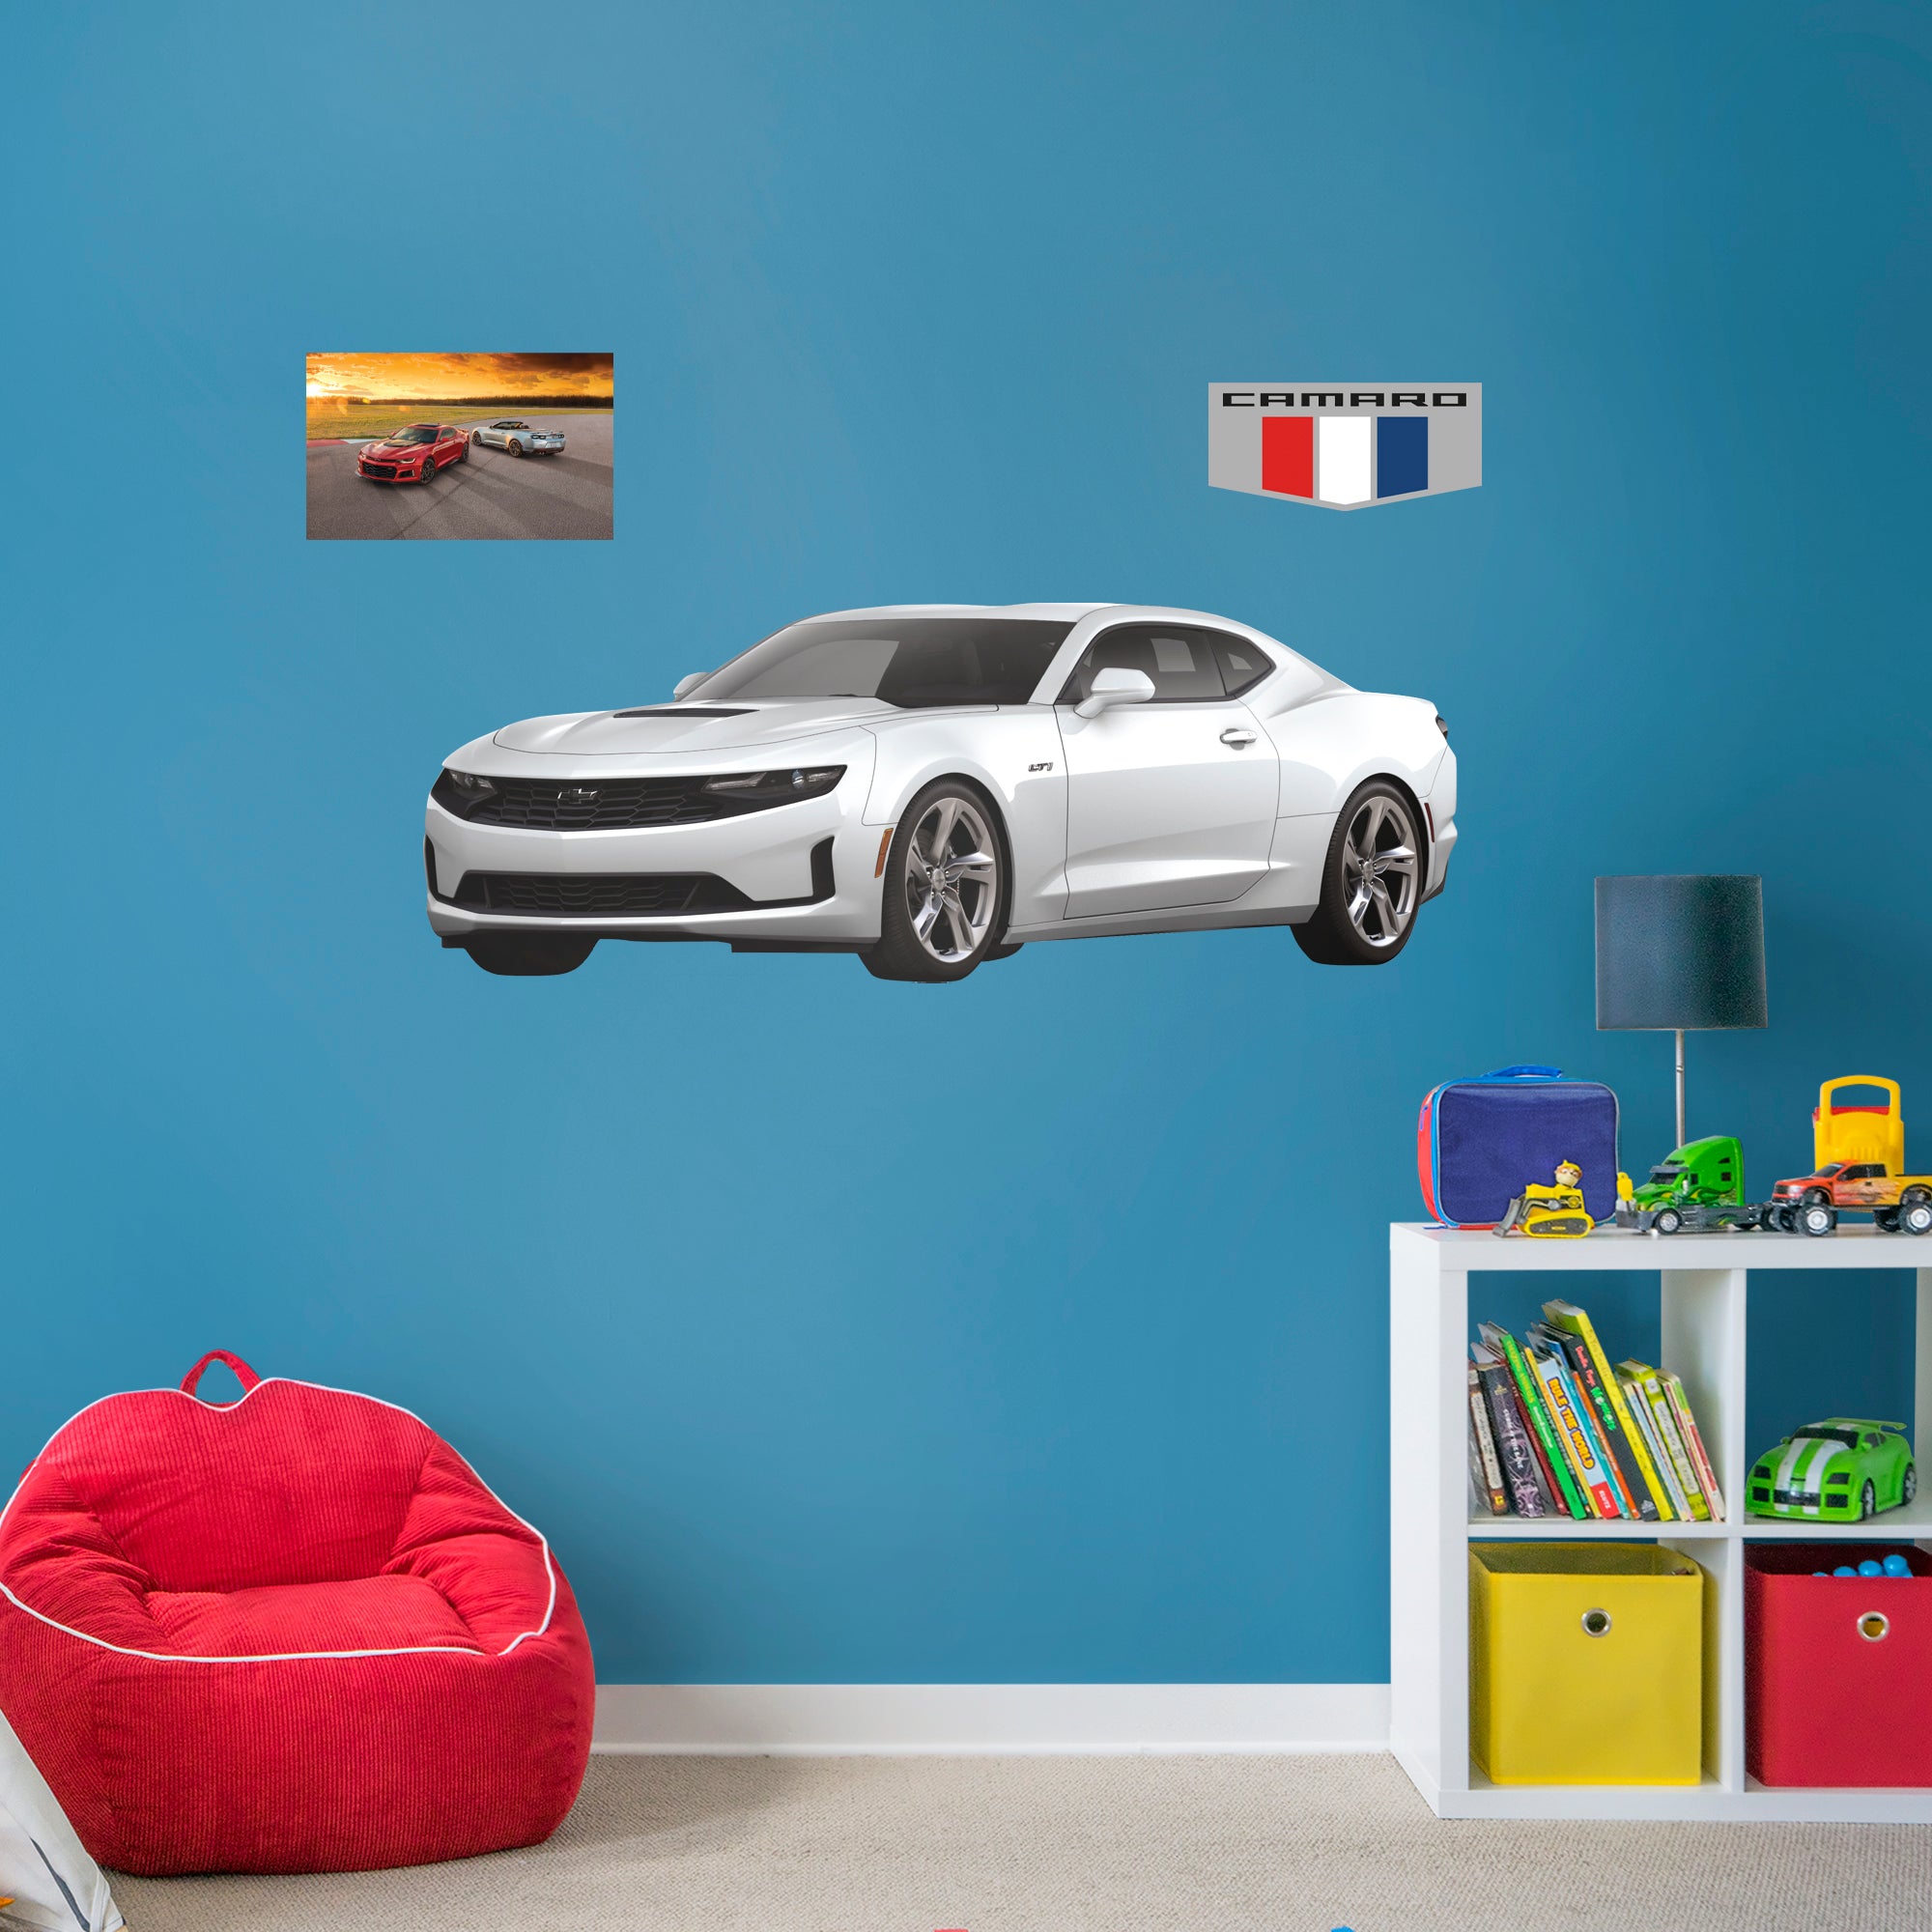 Chevrolet White Camaro: Officially Licensed GM Removable Wall Decal Life-Size + 2 Decals by Fathead | Vinyl